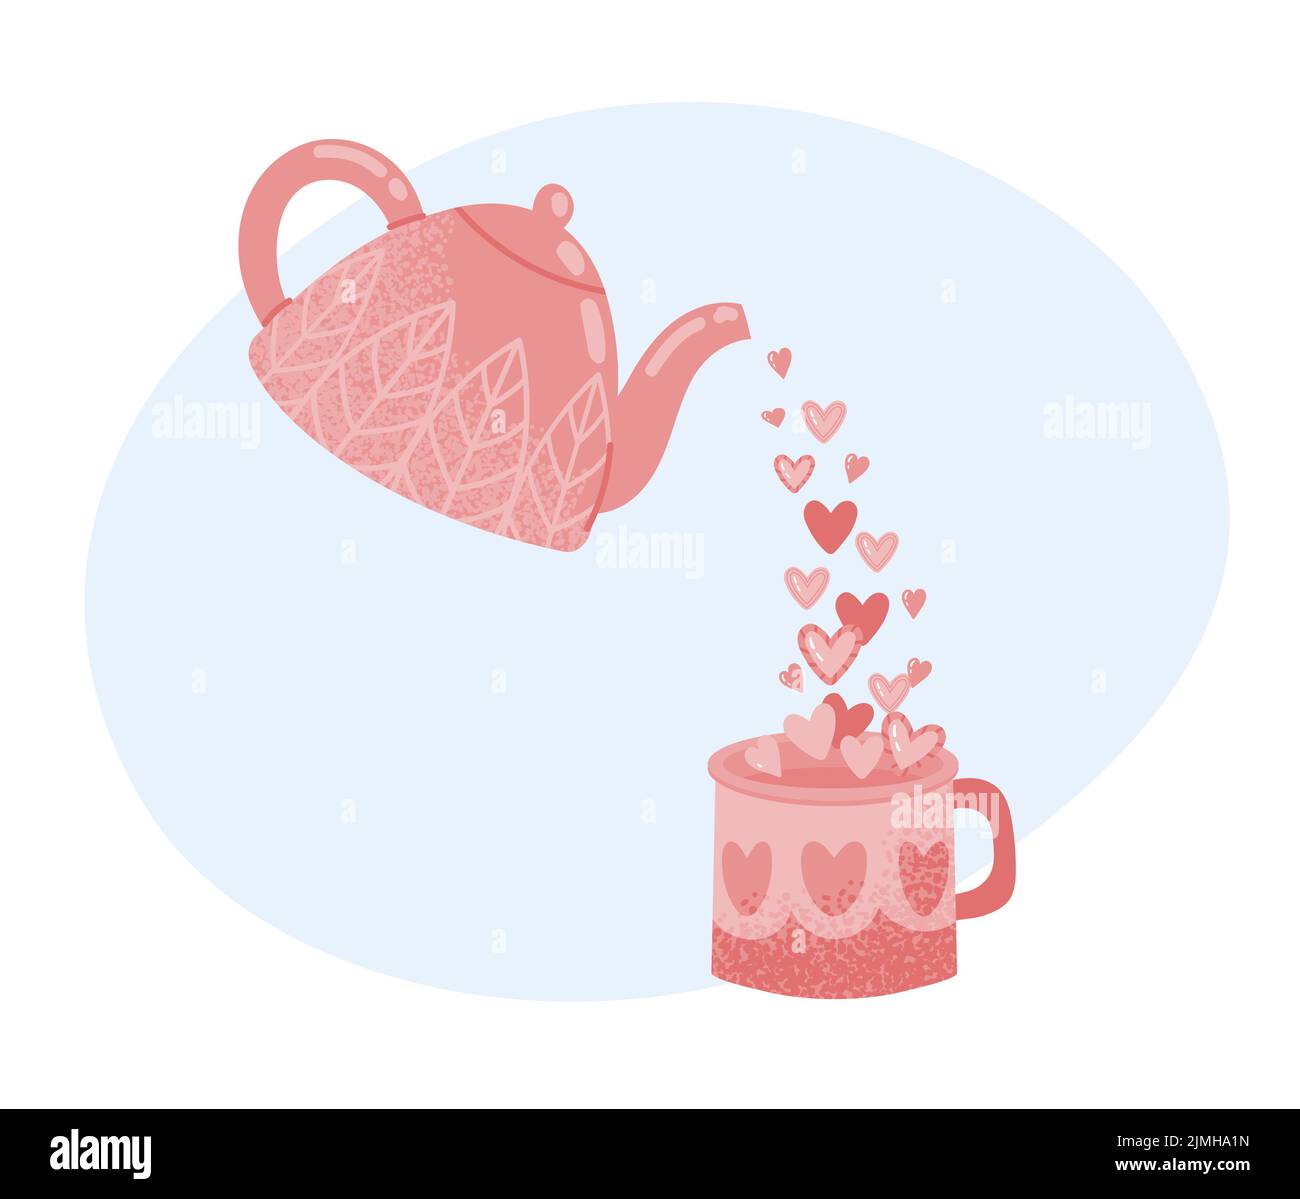 https://c8.alamy.com/comp/2JMHA1N/teapot-with-hearts-cute-pink-kettle-pouring-drink-into-cup-lovely-aromatic-beverage-for-romantic-greeting-card-celebrating-love-holiday-with-romant-2JMHA1N.jpg